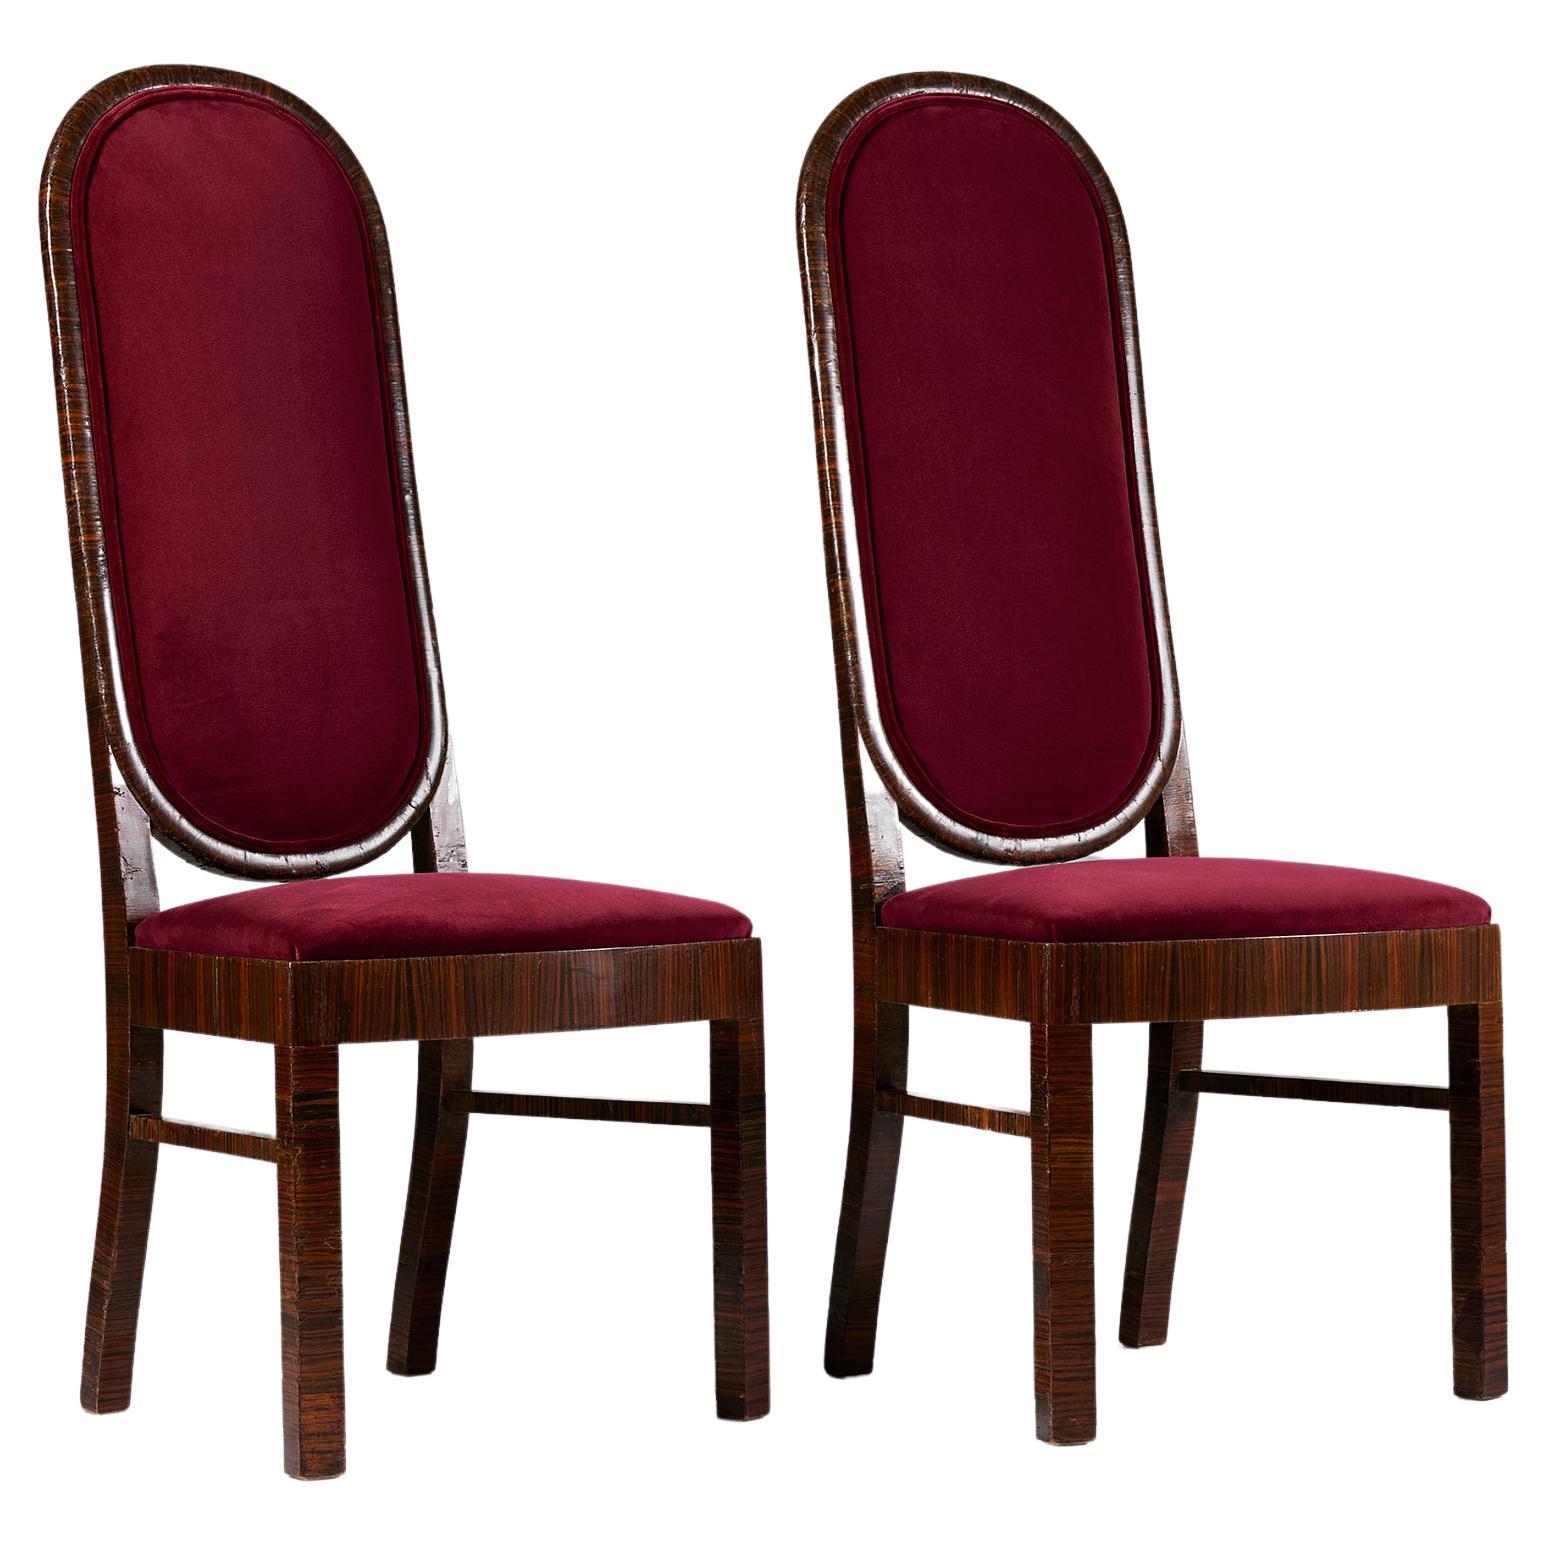 Pair of dining chairs designed by Axel Einar Hjorth for Nordiska Kompaniet For Sale